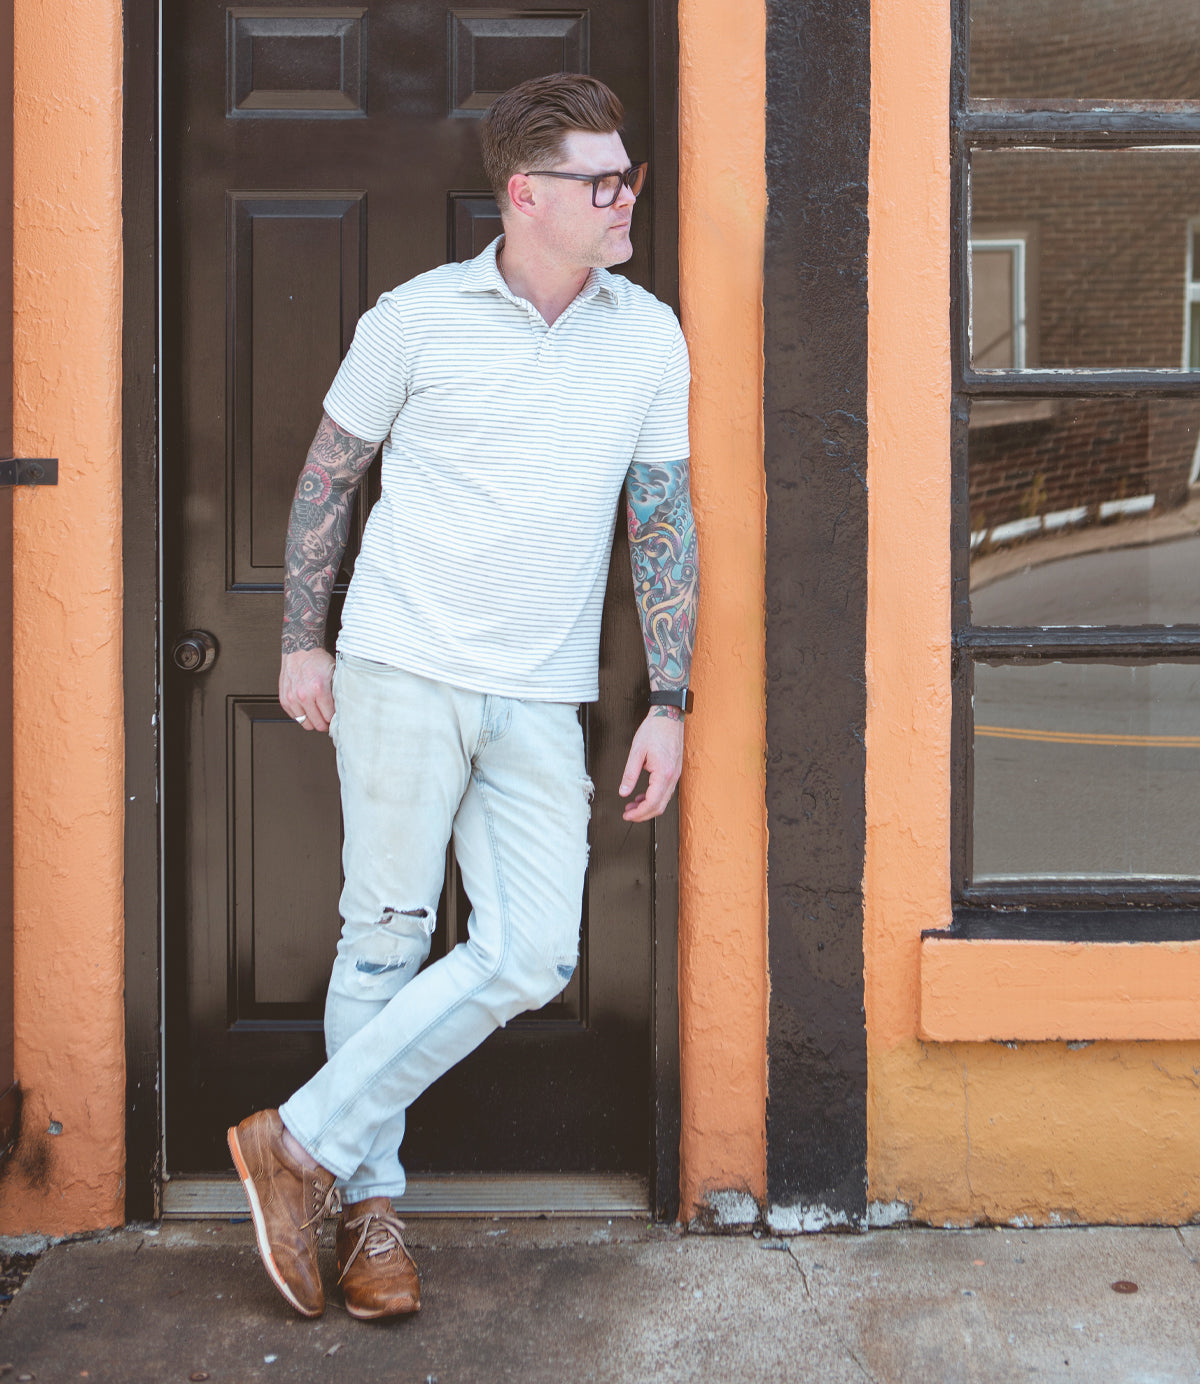 
                  
                    Man leaning against an orange door frame wearing sunglasses, a striped shirt, and light jeans with tattoos visible on his arms is sporting high-quality Roan Yann low-profile sneakers.
                  
                